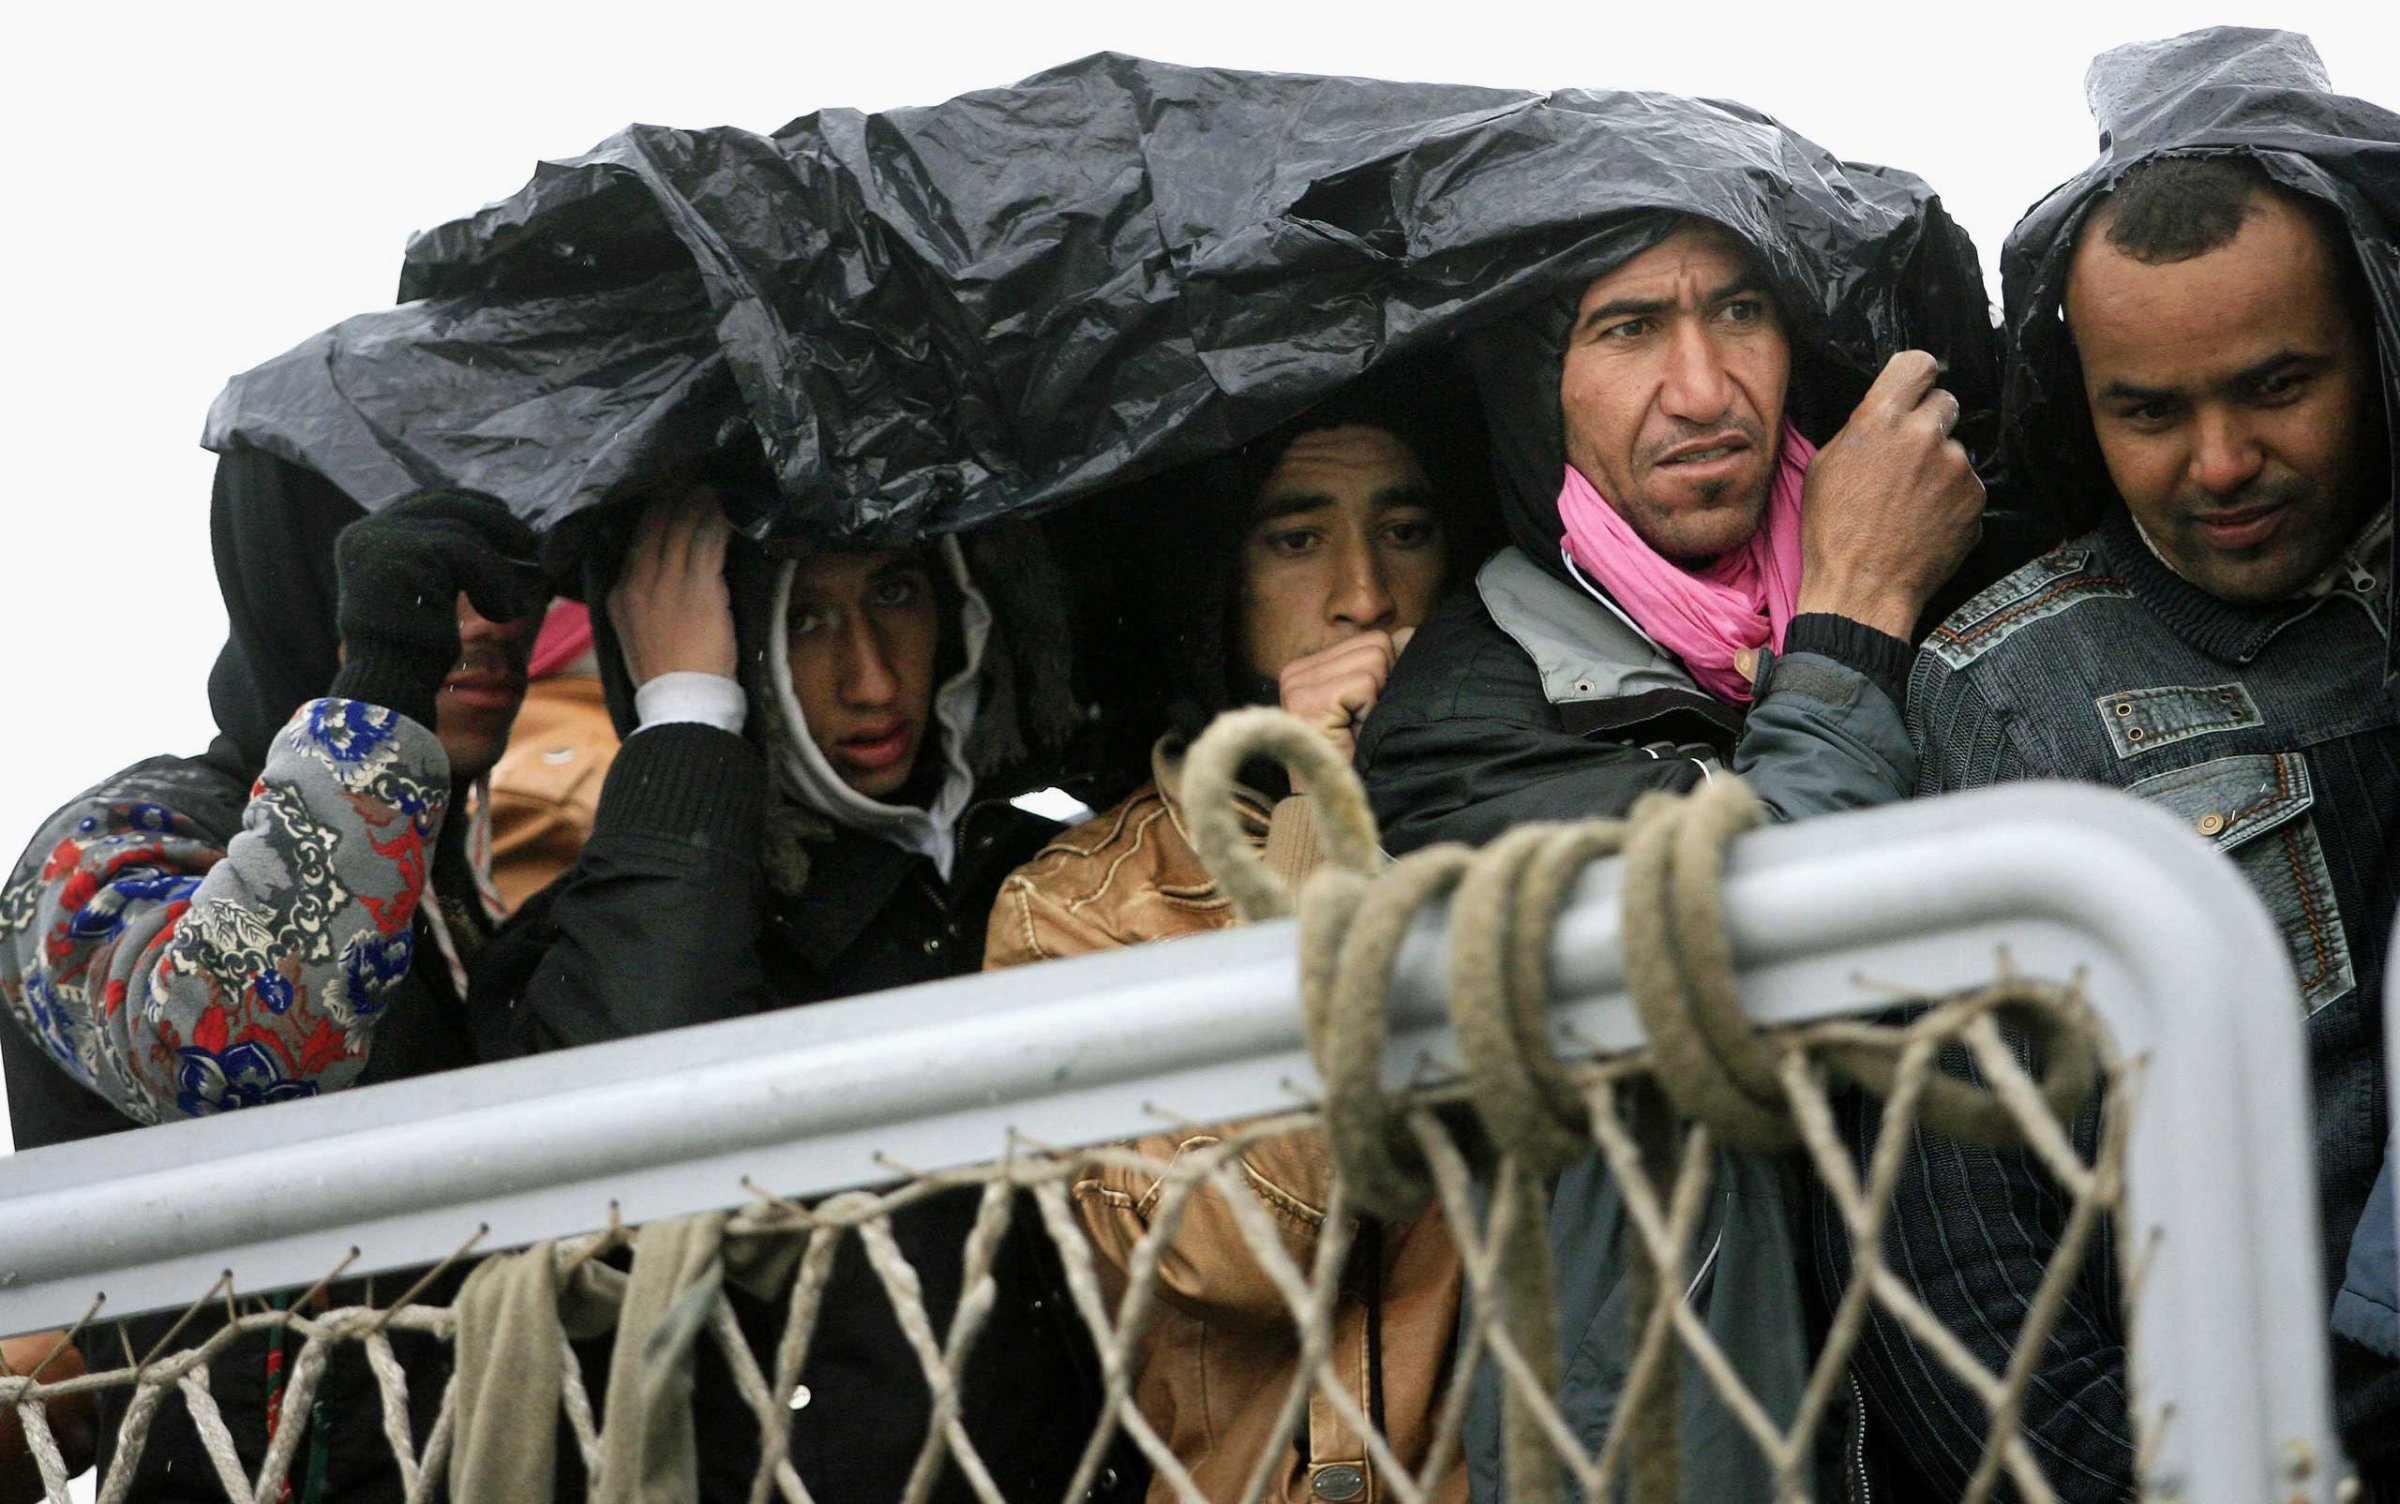 Migrants protect themselves from the rain as they wait to disembark from a ship on Feb. 17, 2015 in Porto Empedocle, south Sicily, following a rescue operation of migrants as part of the International Frontex plan.